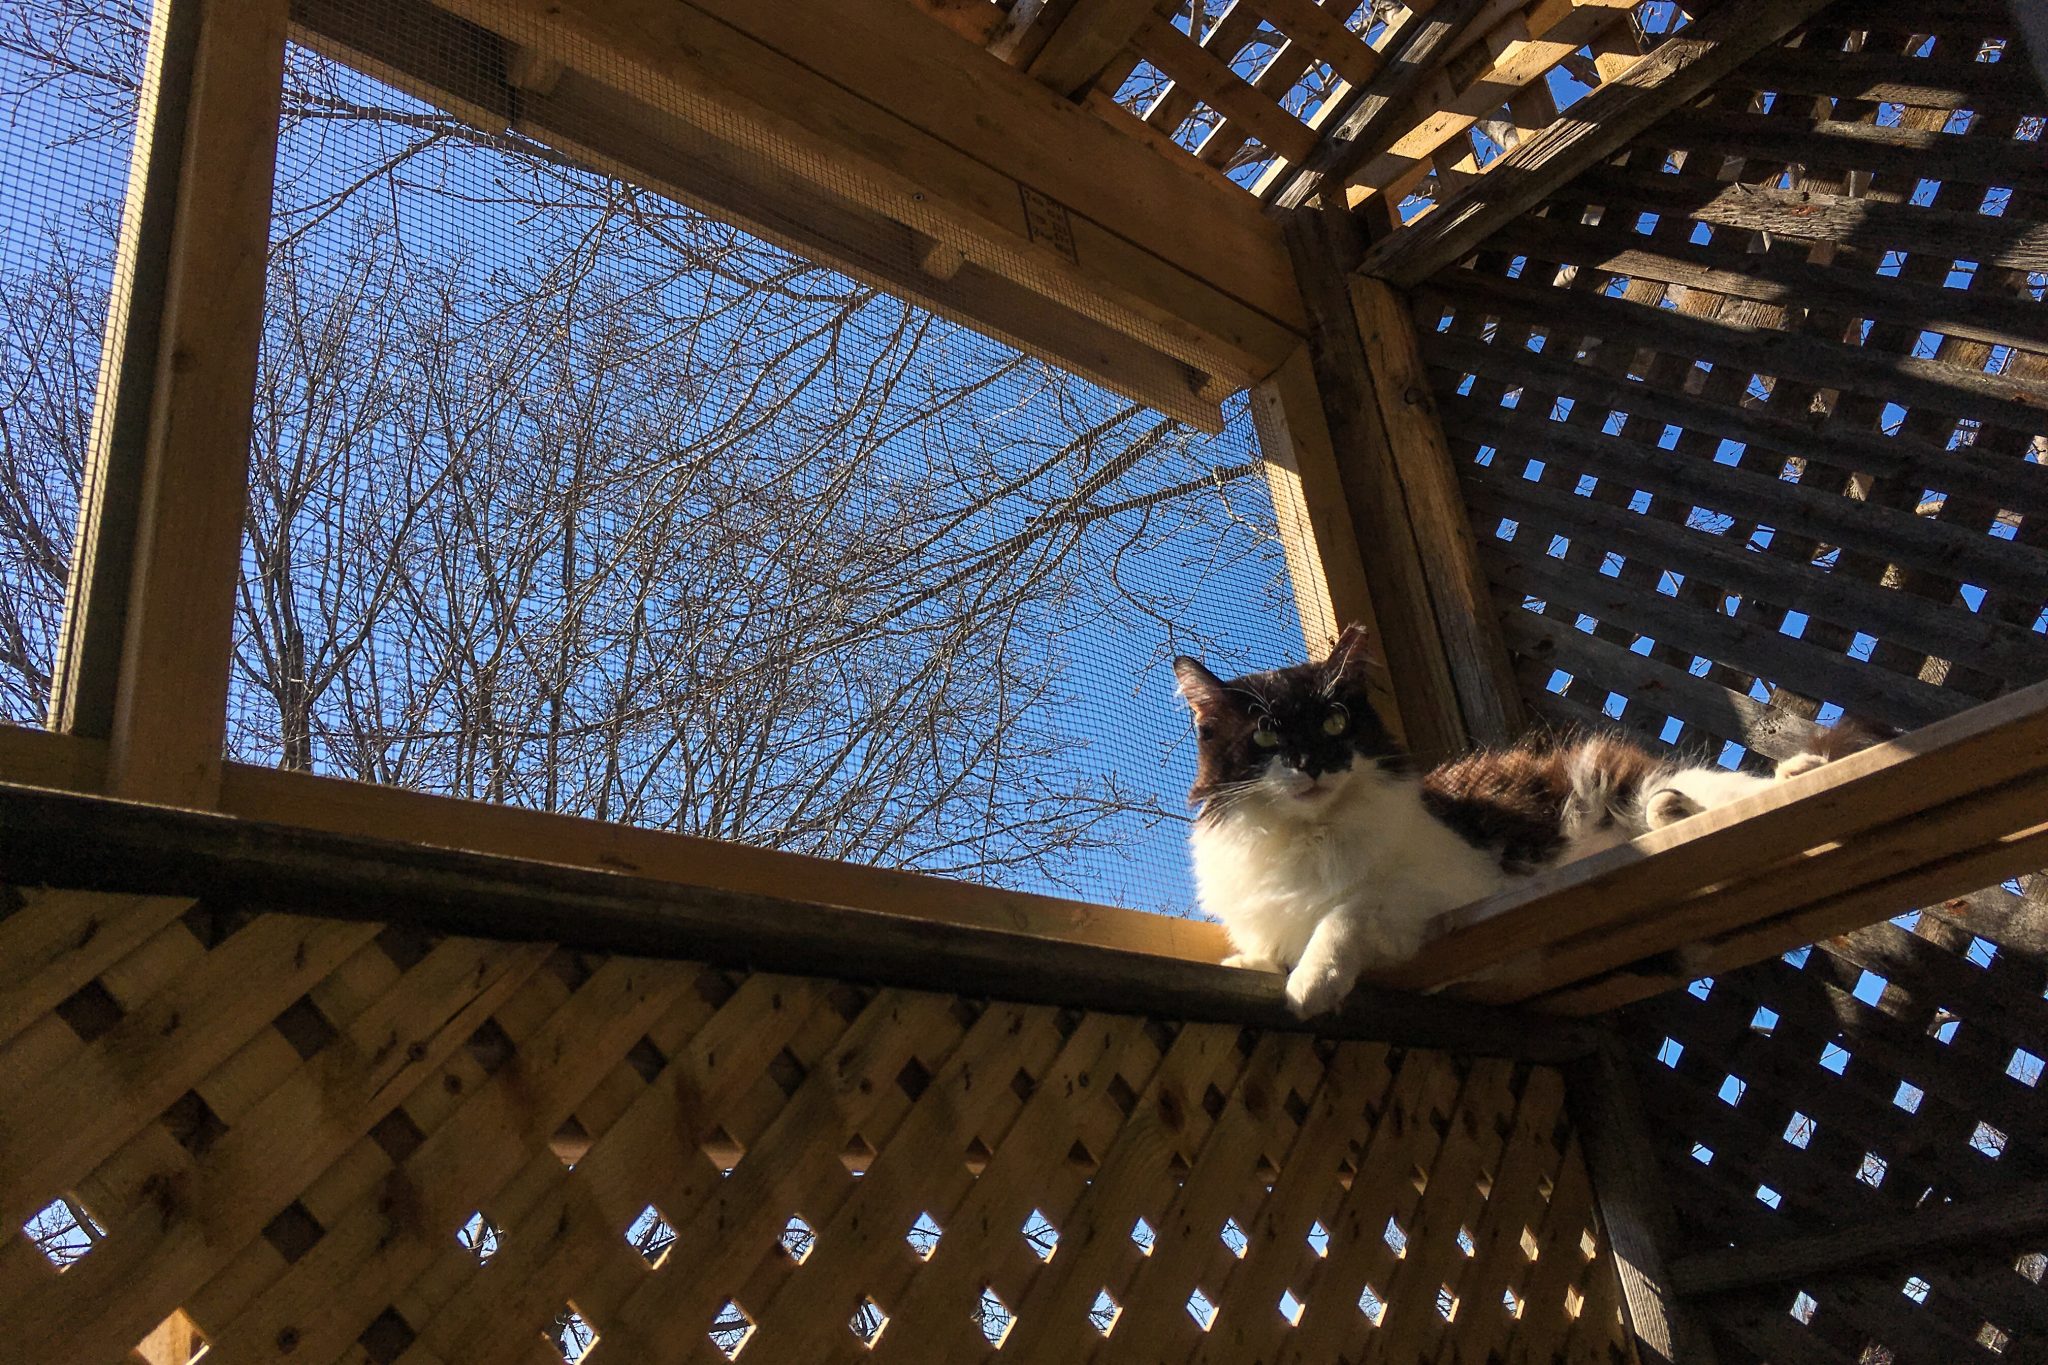 Catio Hacks Every Cat Owner Should Know